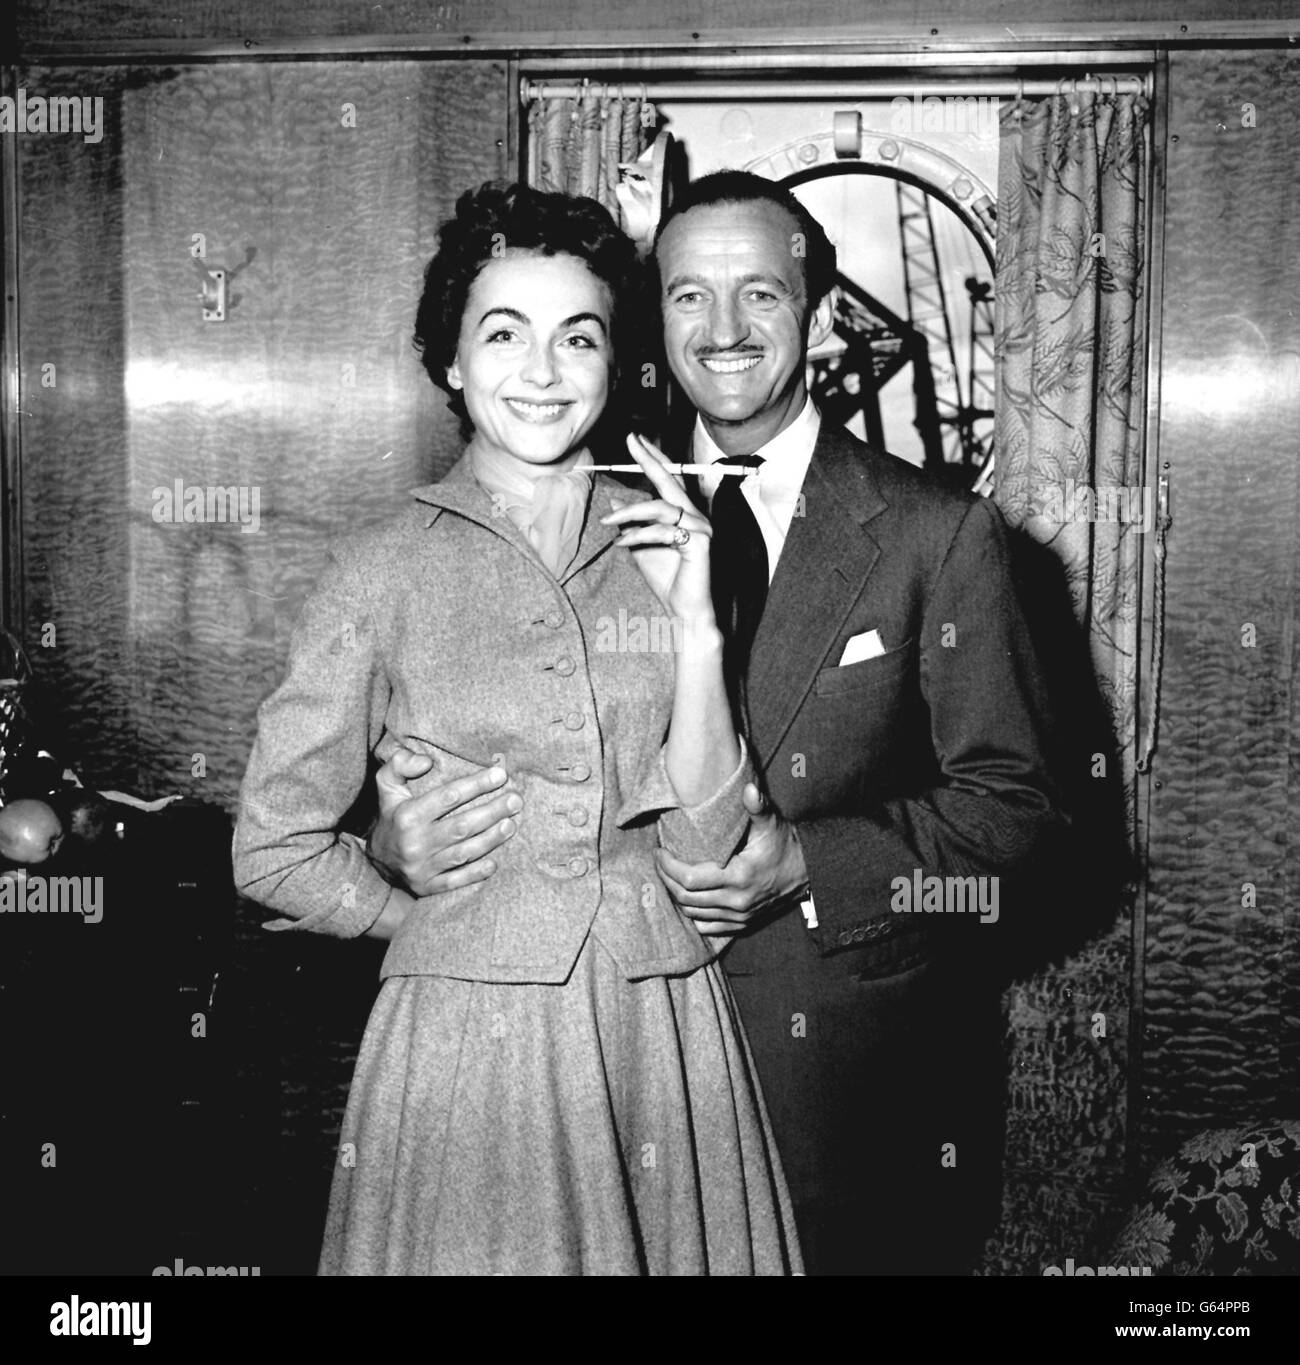 David Niven and his wife Stock Photo - Alamy